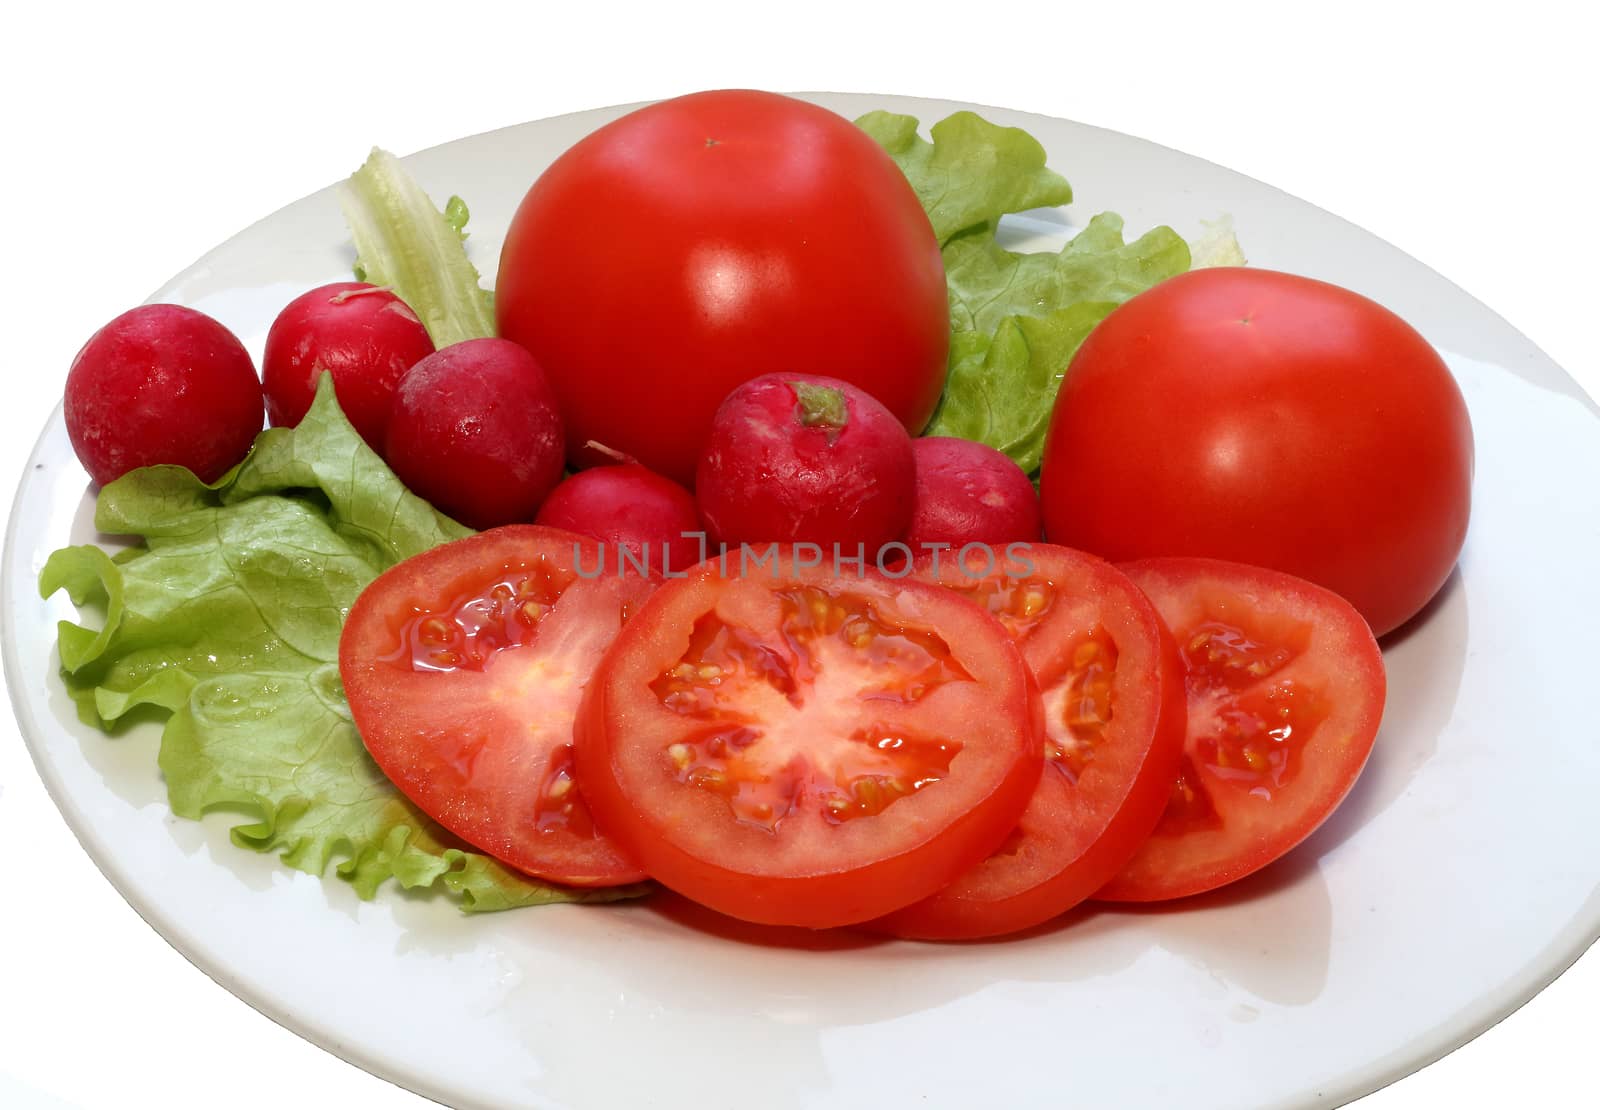 Radishes, tomatoes and lettuce. A healthy diet. by Maris